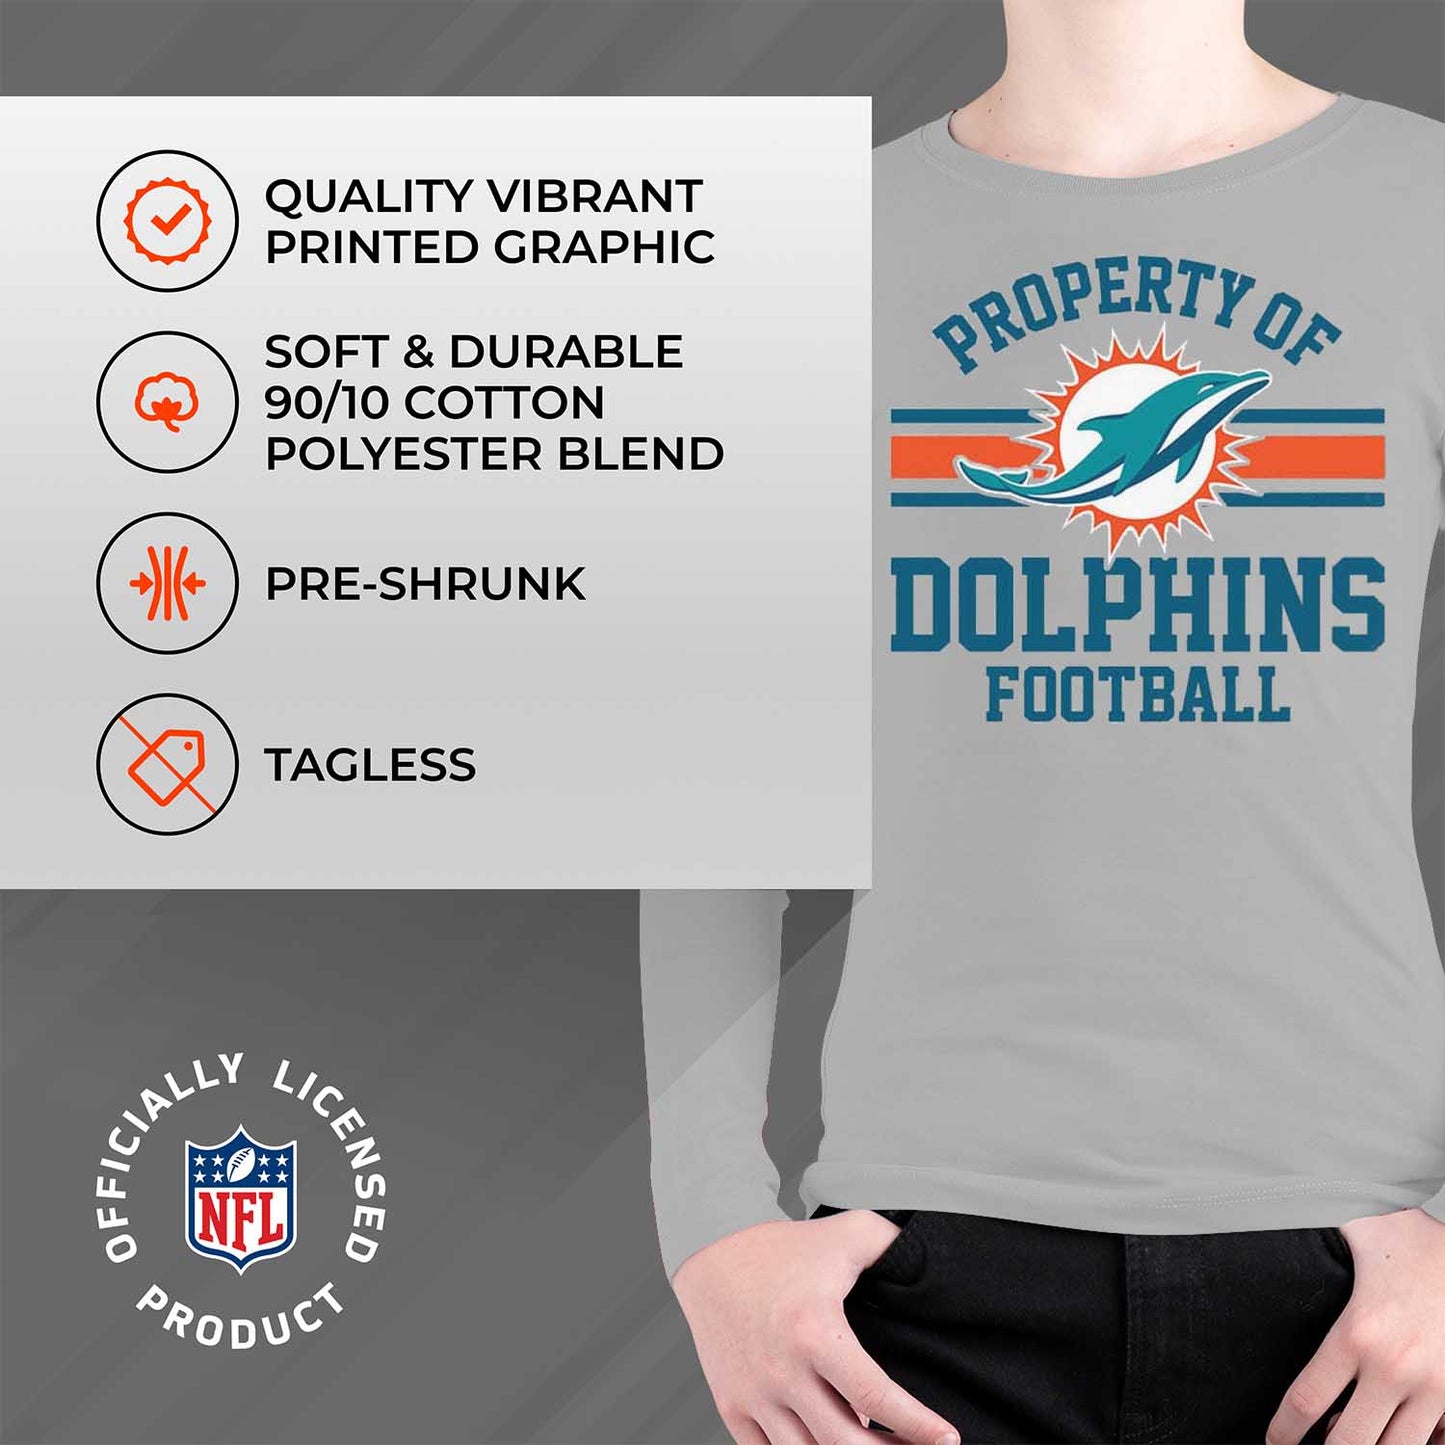 Miami Dolphins NFL Youth Property Of Long Sleeve Lightweight T Shirt - Sport Gray